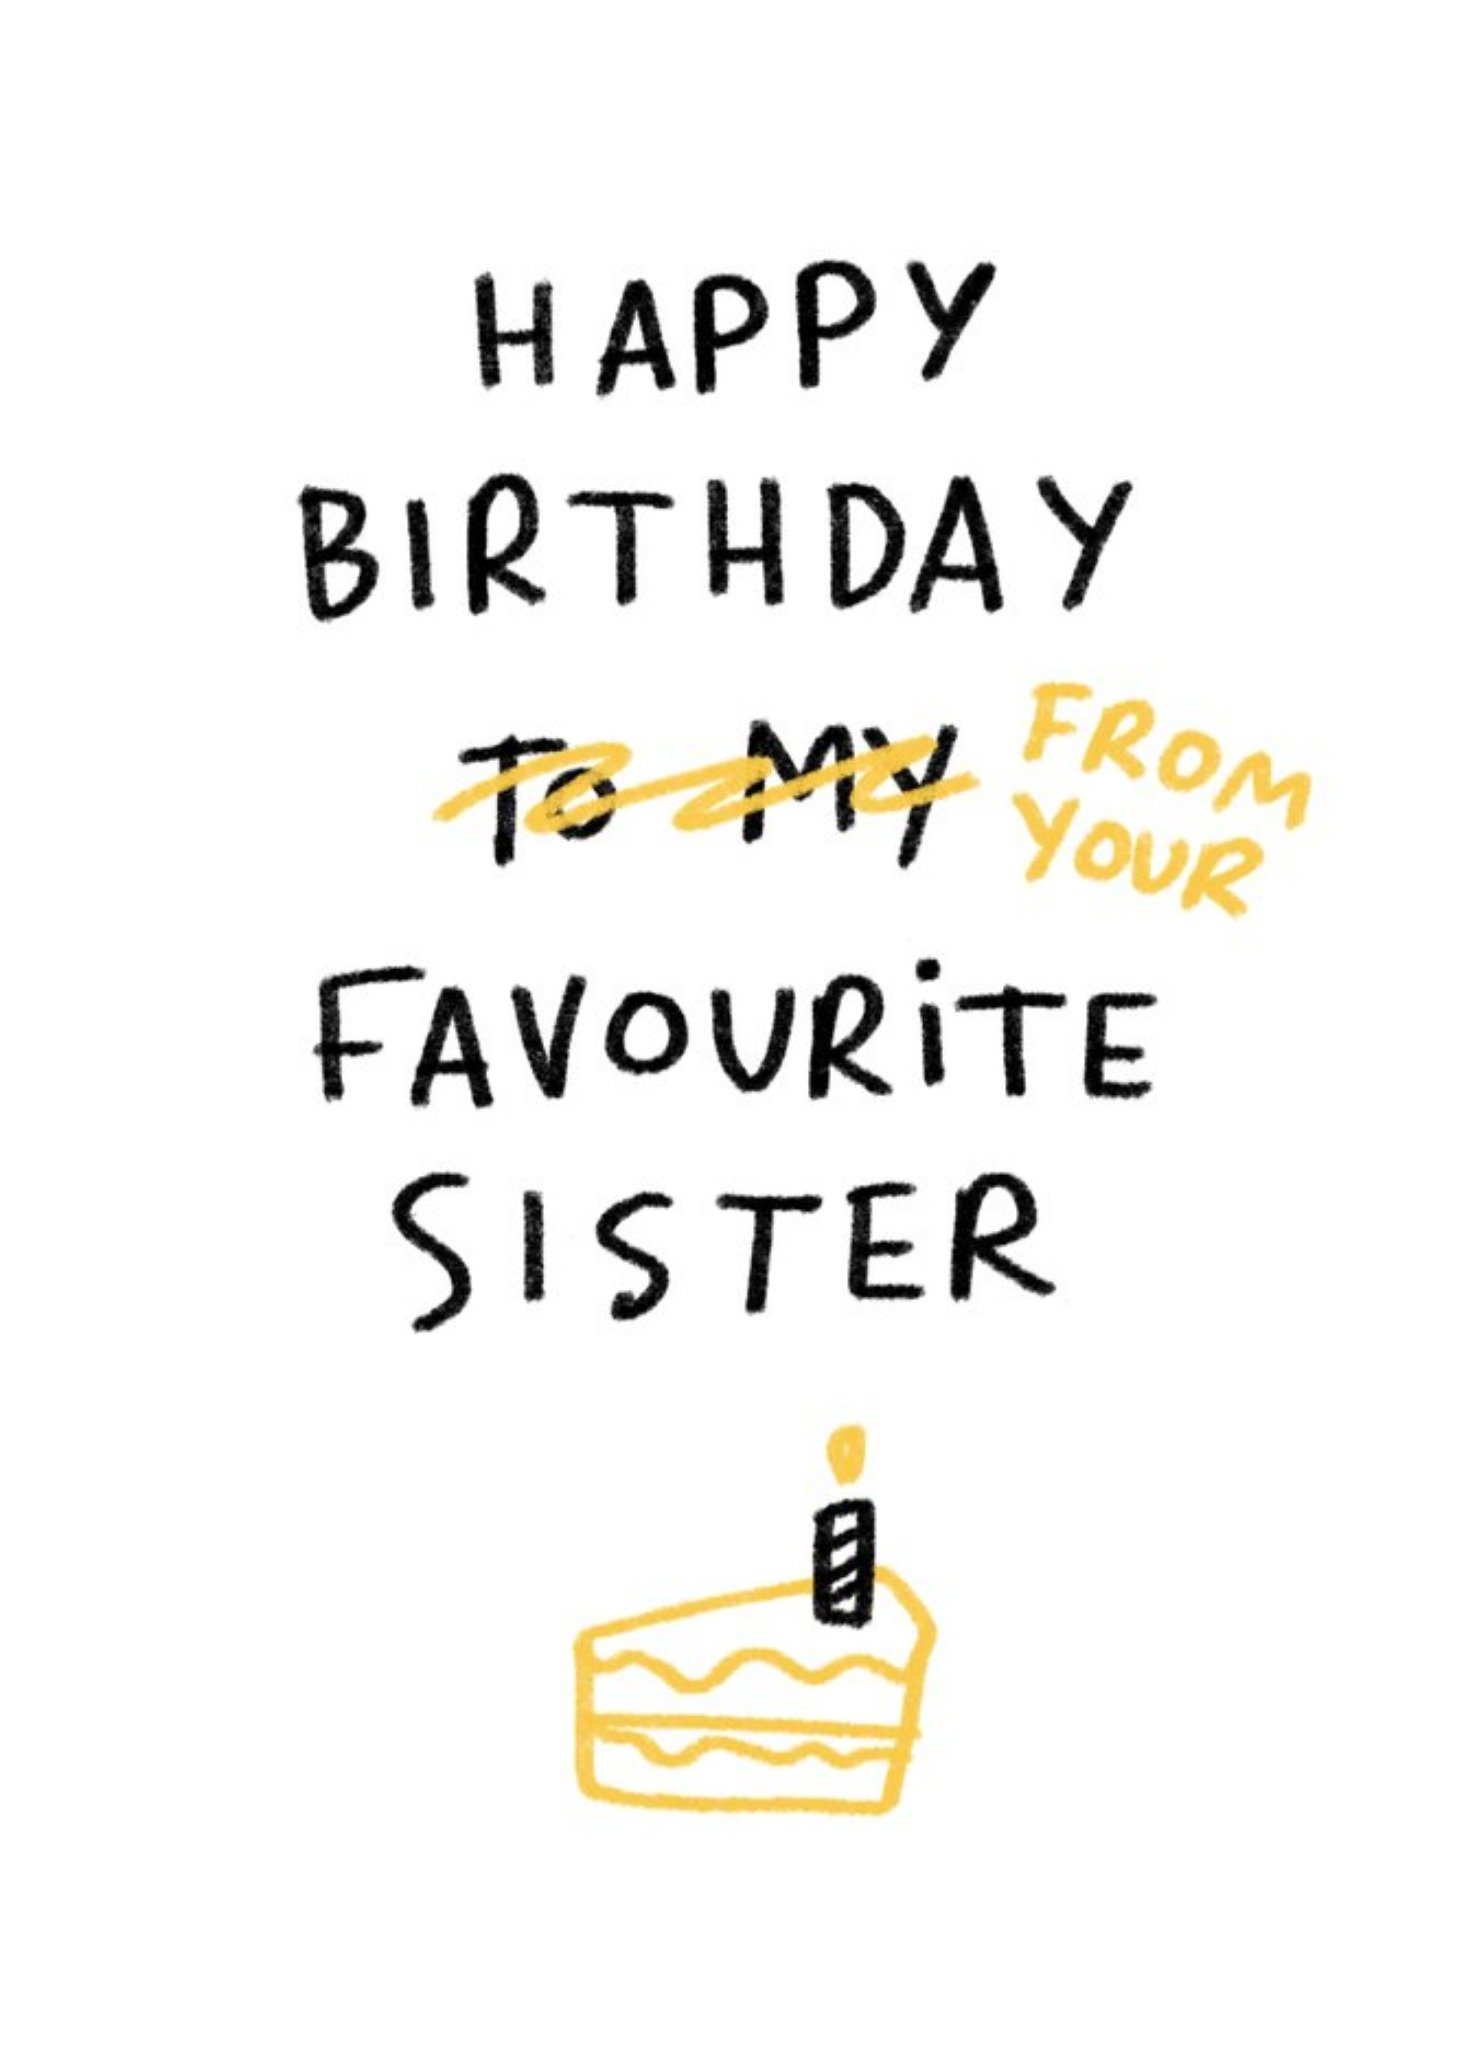 Moonpig Happy Birthday From Your Favourite Sister Funny Card, Large